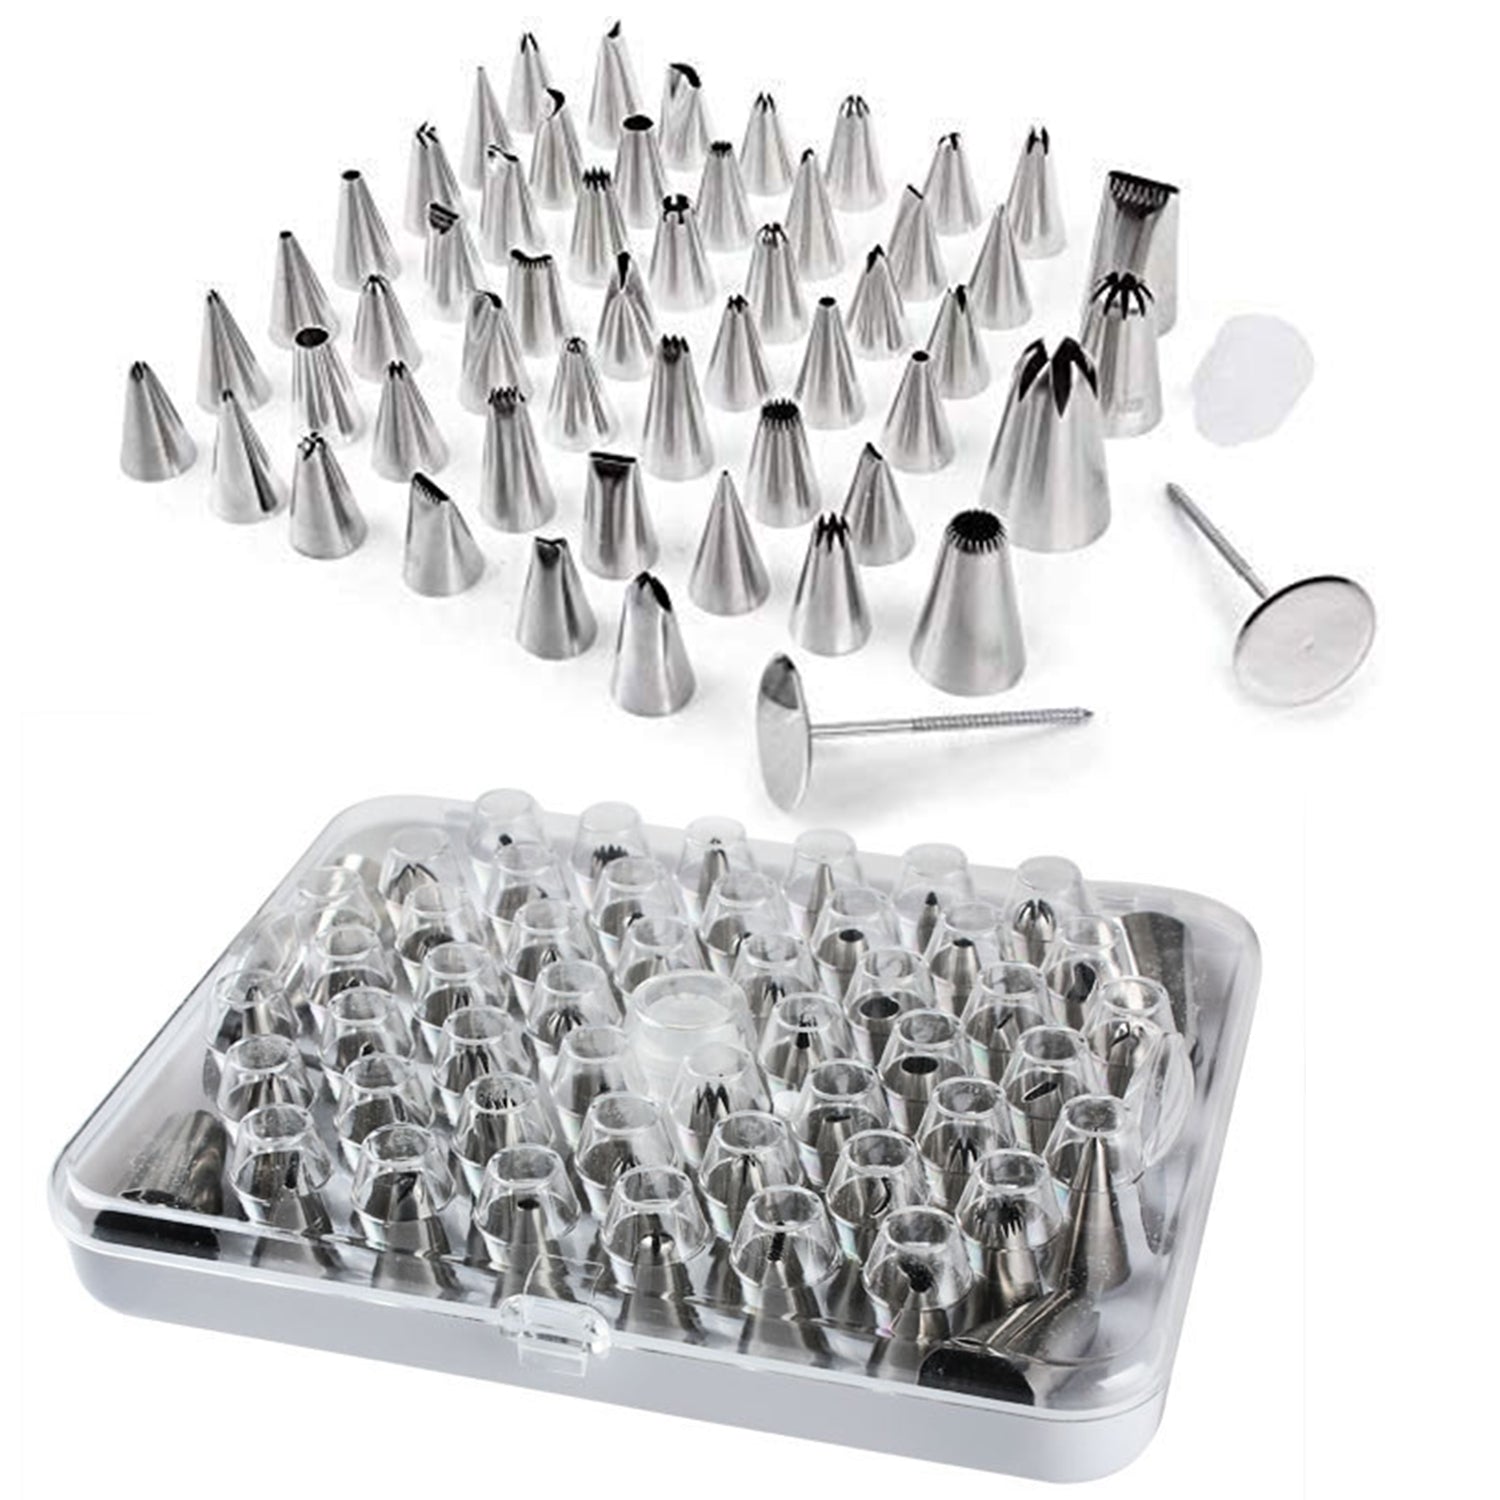 4722 Cake Nozzle Set and Cake Nozzle Tool Used for Making Cake and Pastry Decorations. 